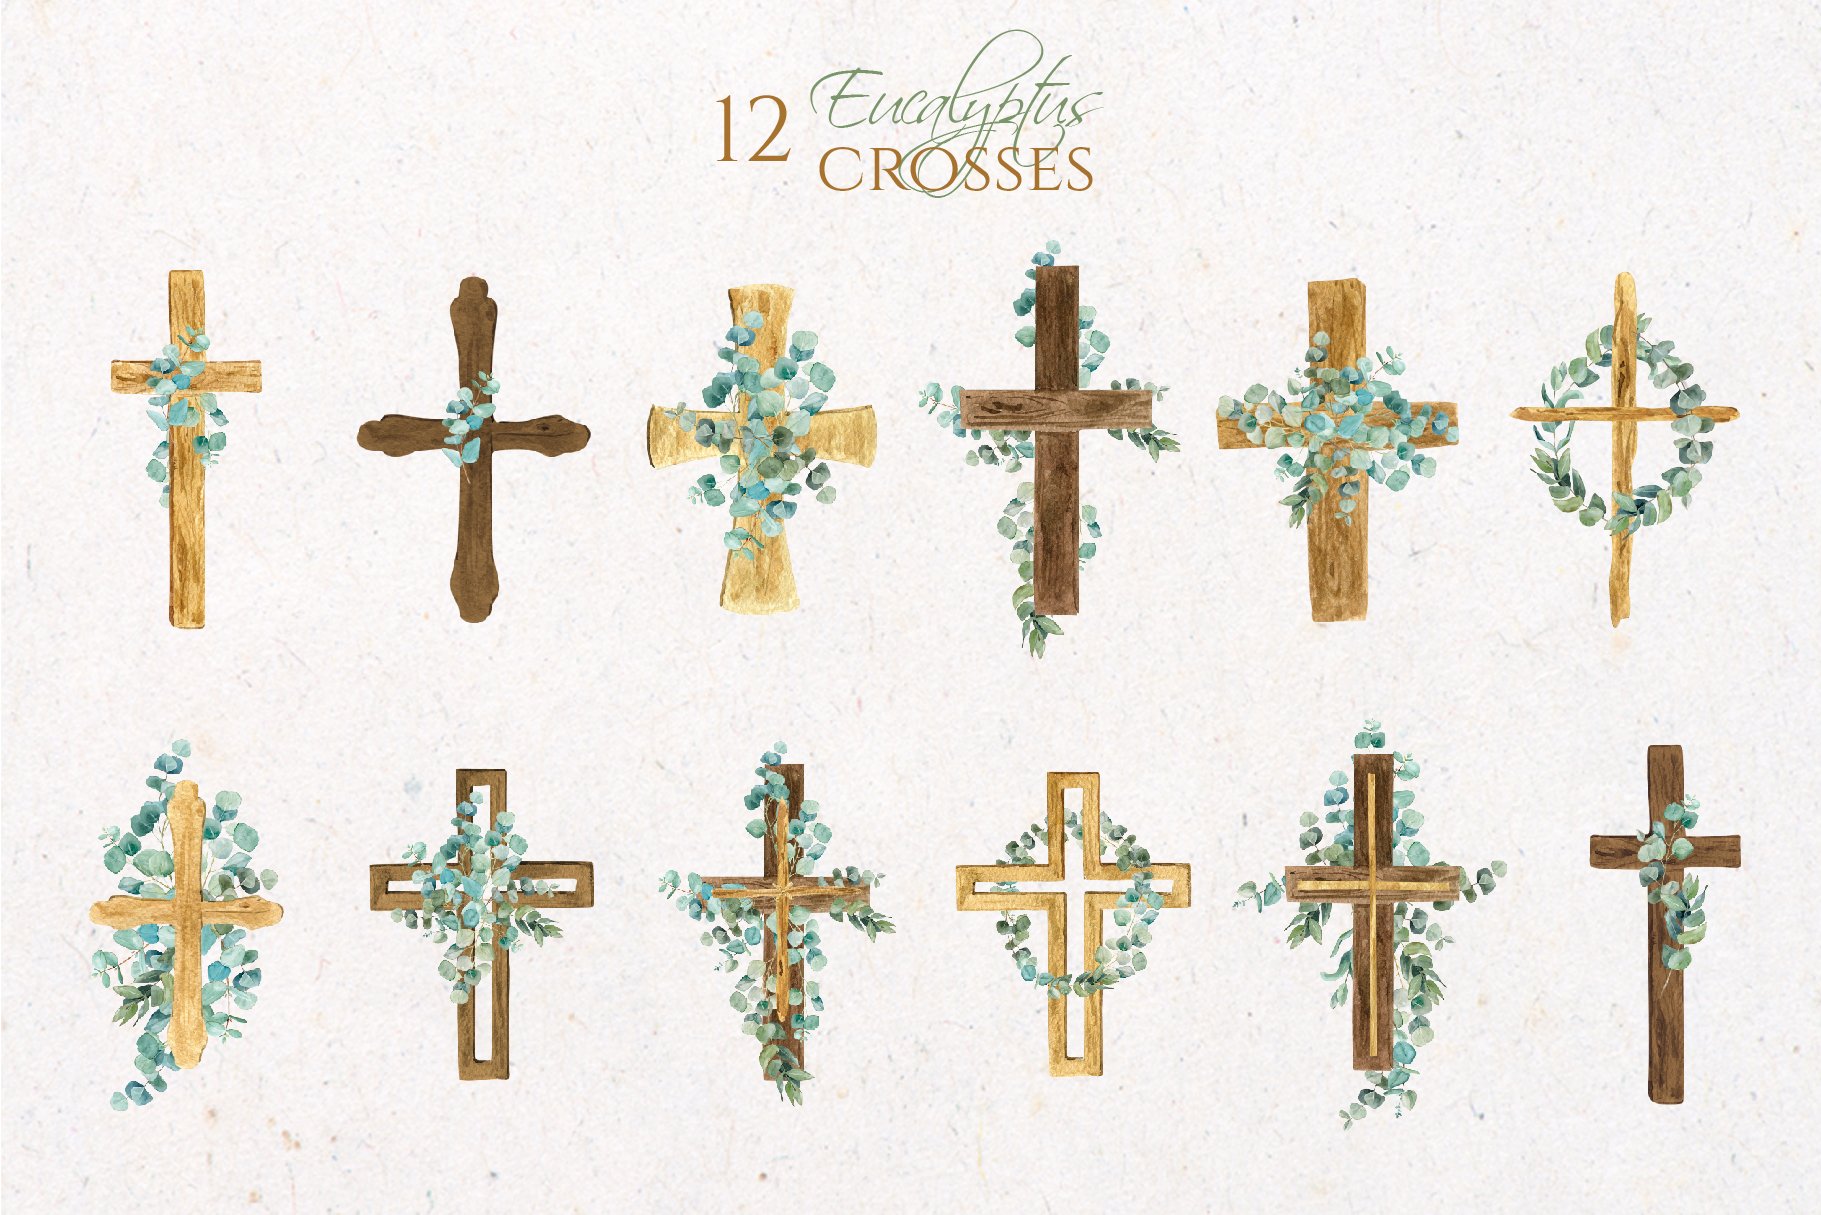 Diverse of creative crosses in a light green.